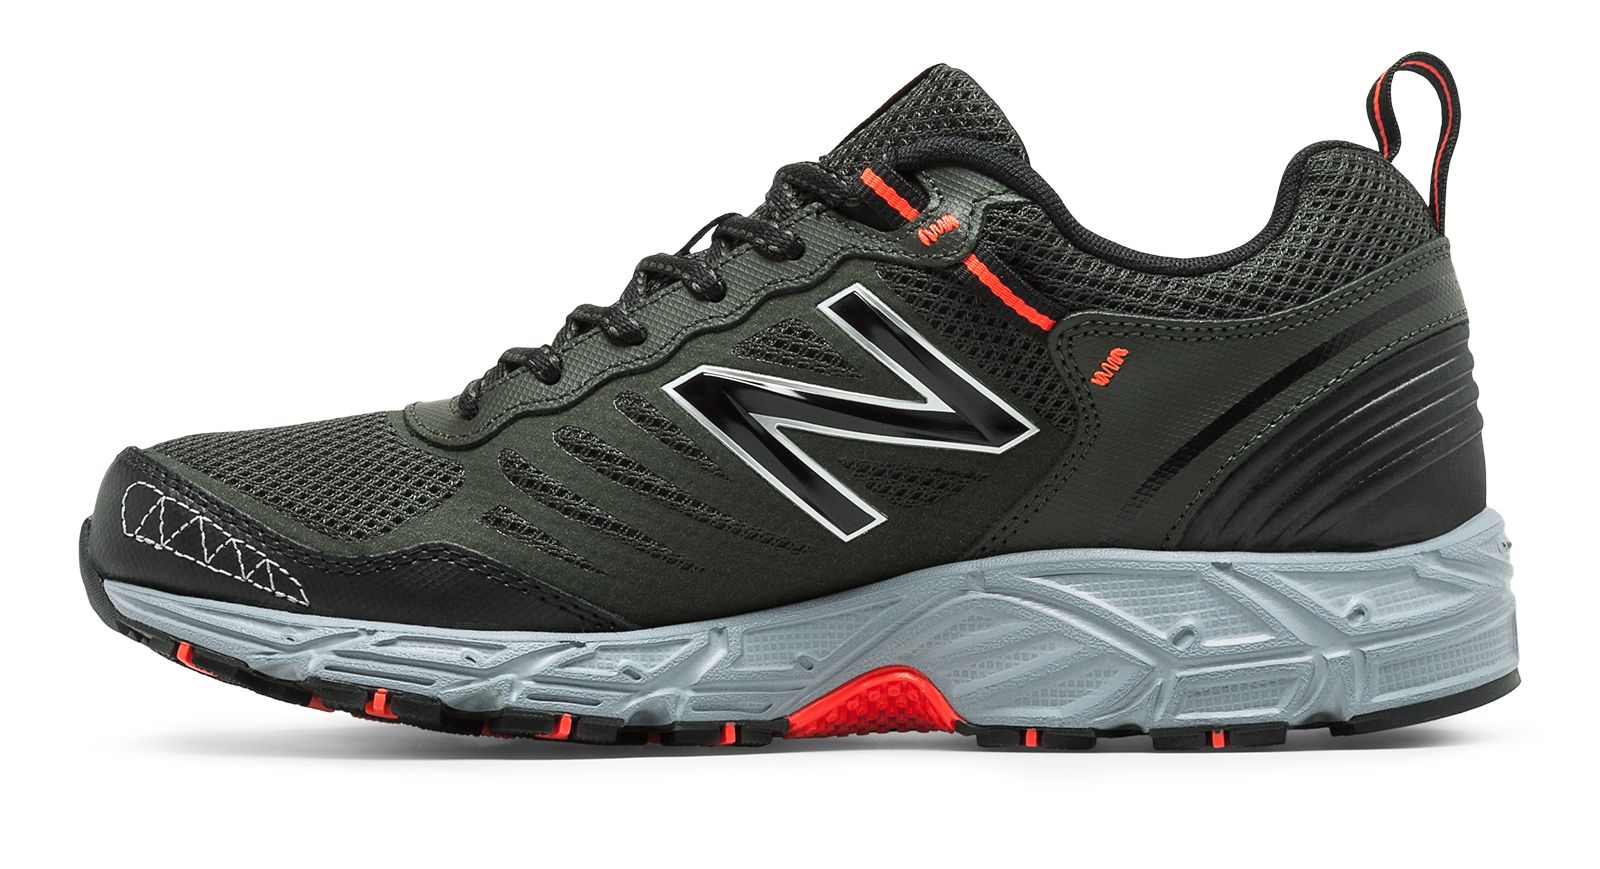 Off on MTE573F3 at Joe's New Balance Outlet